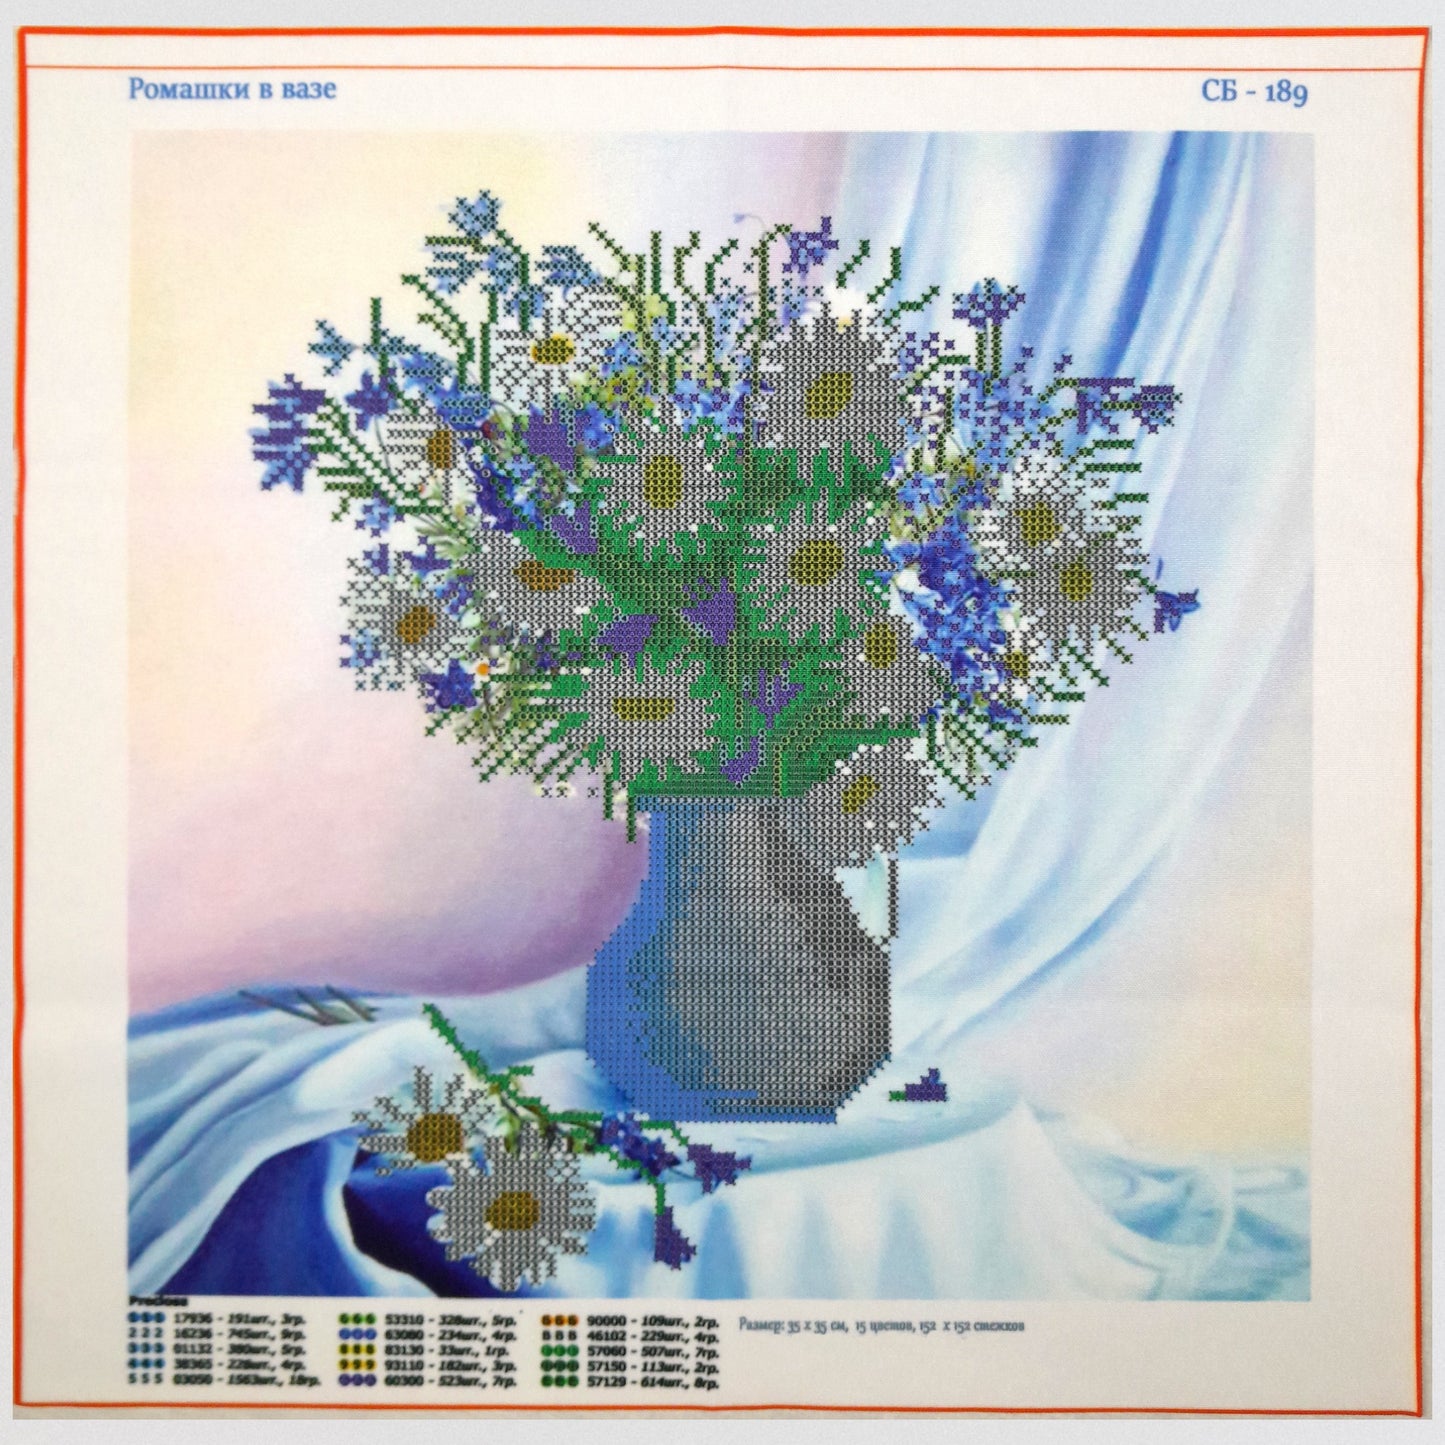 Bead embroidery kit "Daisies in vase". Size: 13.8 - 13.8 in (35 - 35 cm) - VadymShop